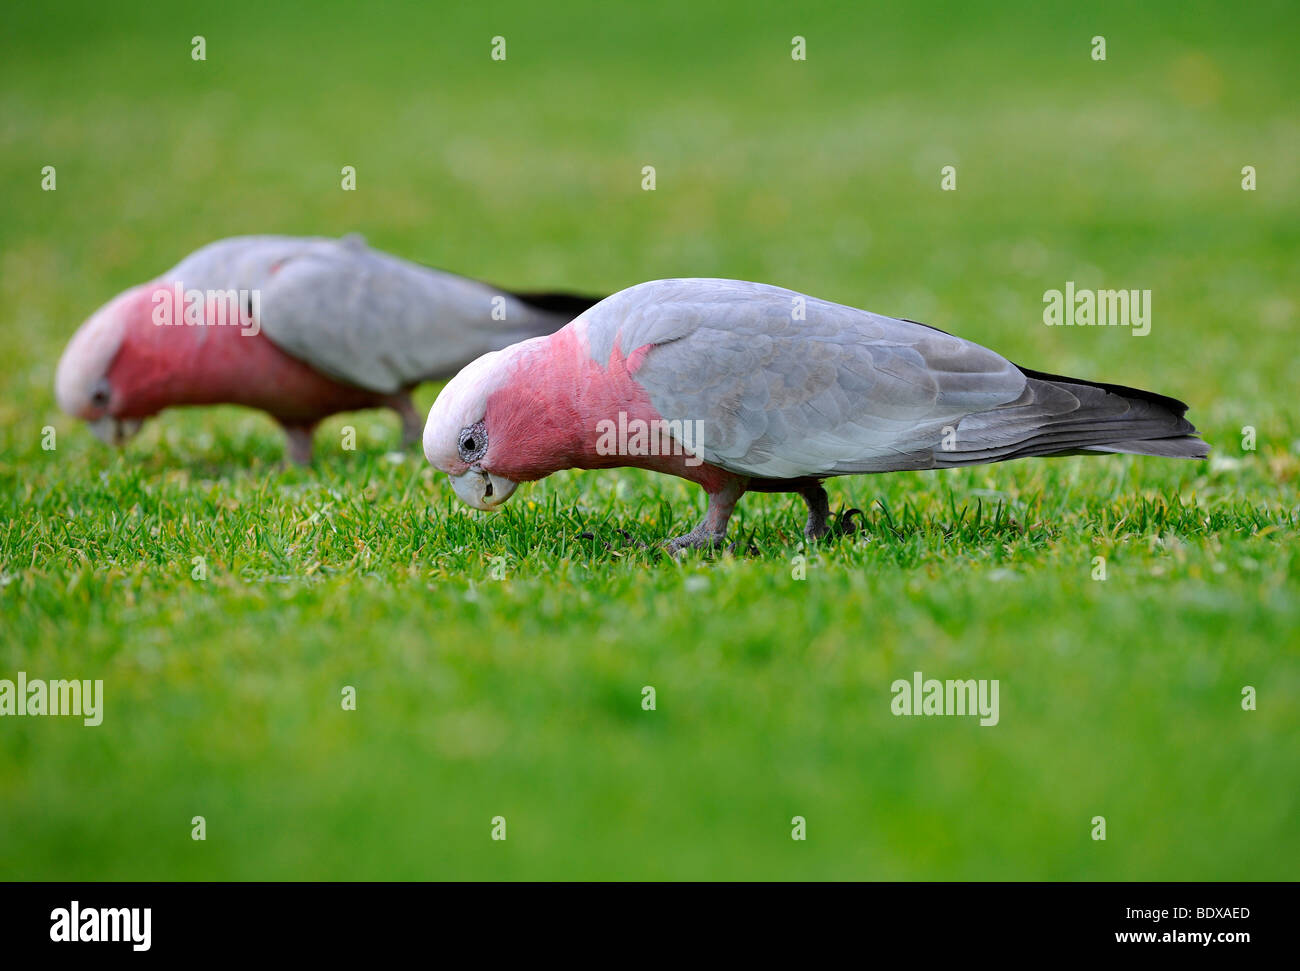 Galahs, also known as the Rose-breasted Cockatoo, Galah Cockatoo, Roseate Cockatoo or Pink and Grey (Eolophus roseicapilla), gr Stock Photo